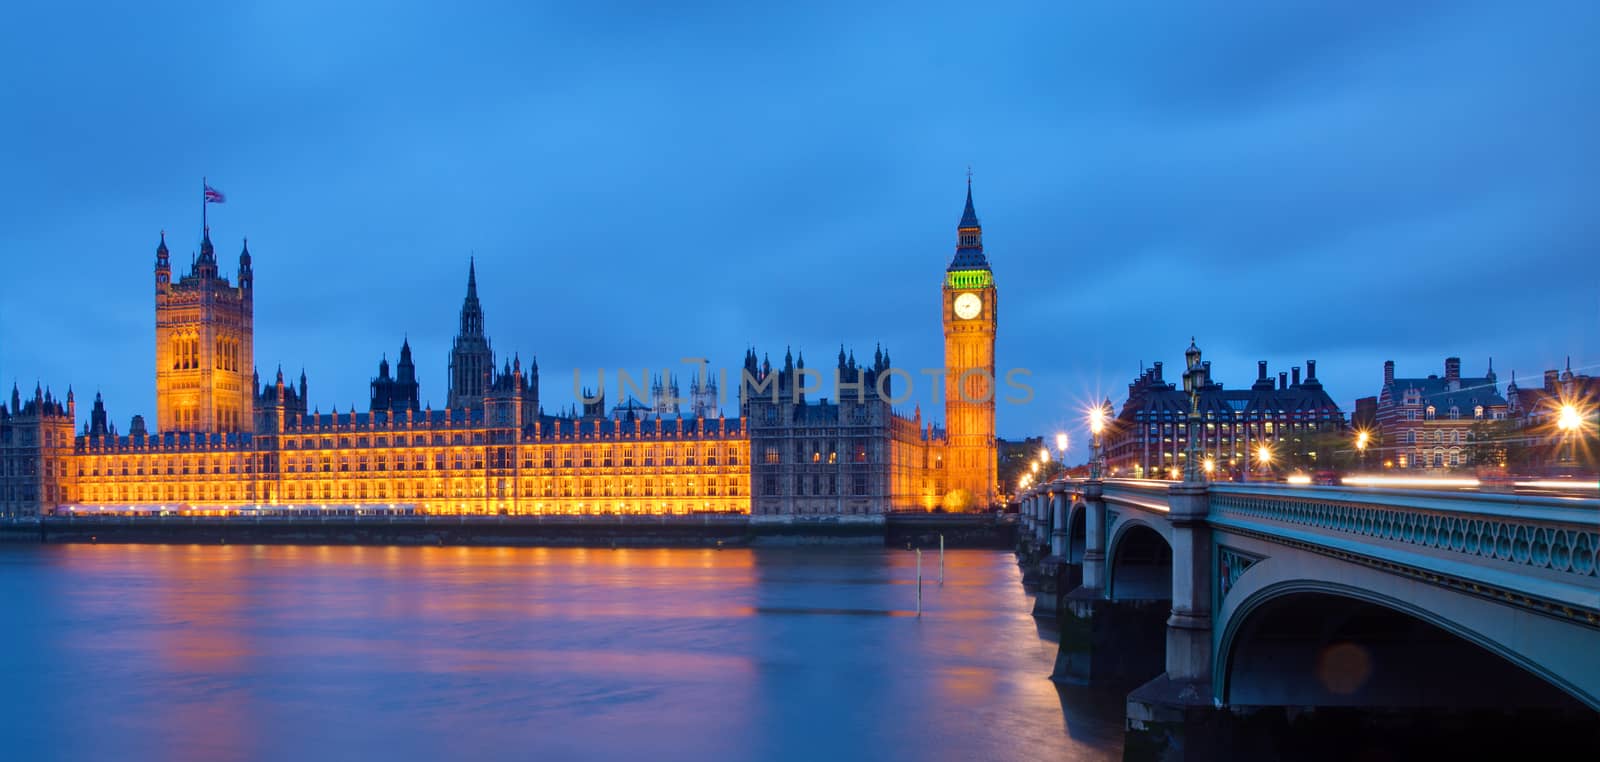 The Houses of Parliament after sunset by elxeneize